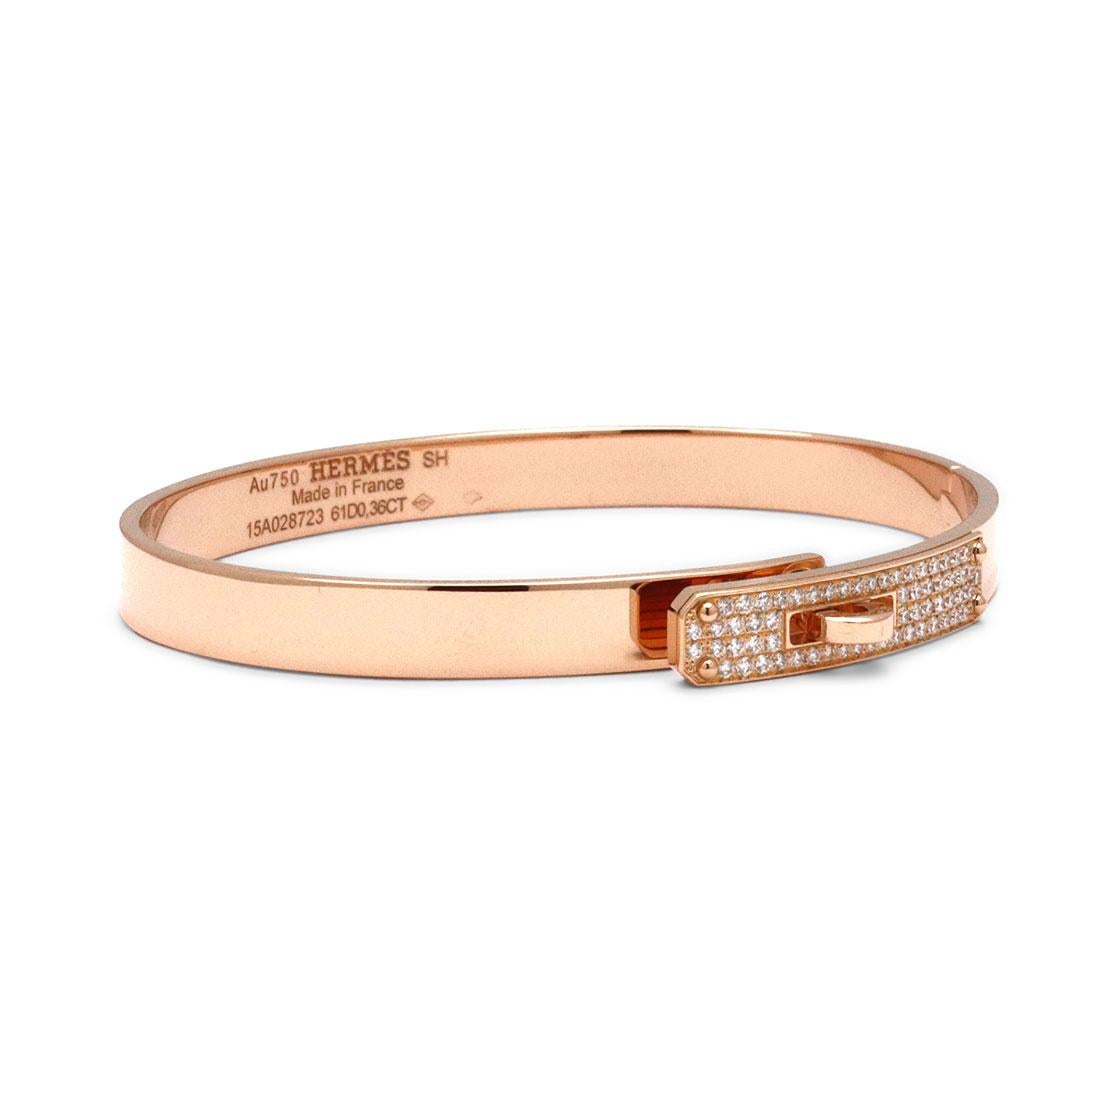 Authentic Hermès 'Kelly' bracelet crafted in 18 karat rose gold and accented with round brilliant cut diamonds weighing approximately 0.36 carats. It's fastener, a turn clasp, is synonymous with the brand. Signed Hermes Paris, Au750, Made in France,